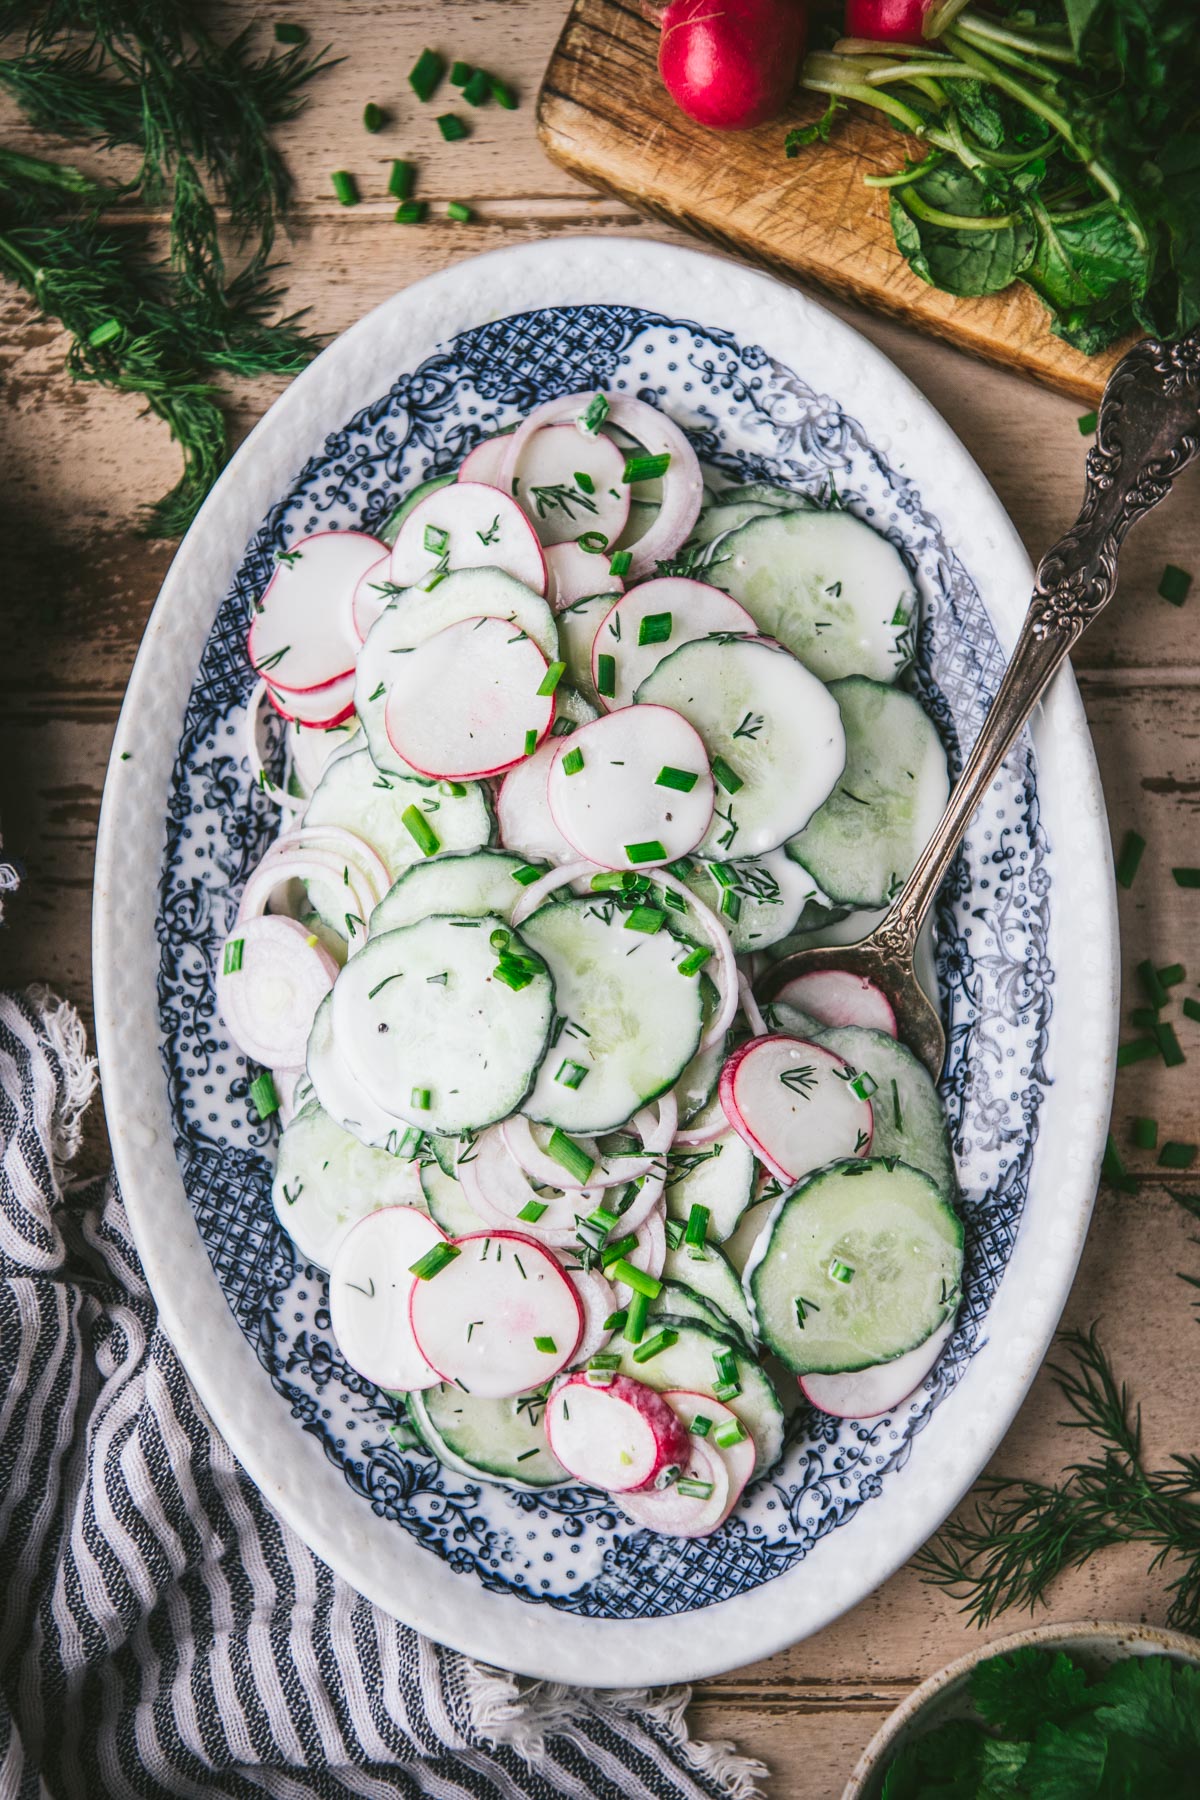 Creamy cucumber radish salad with dill on a blue and white platter.